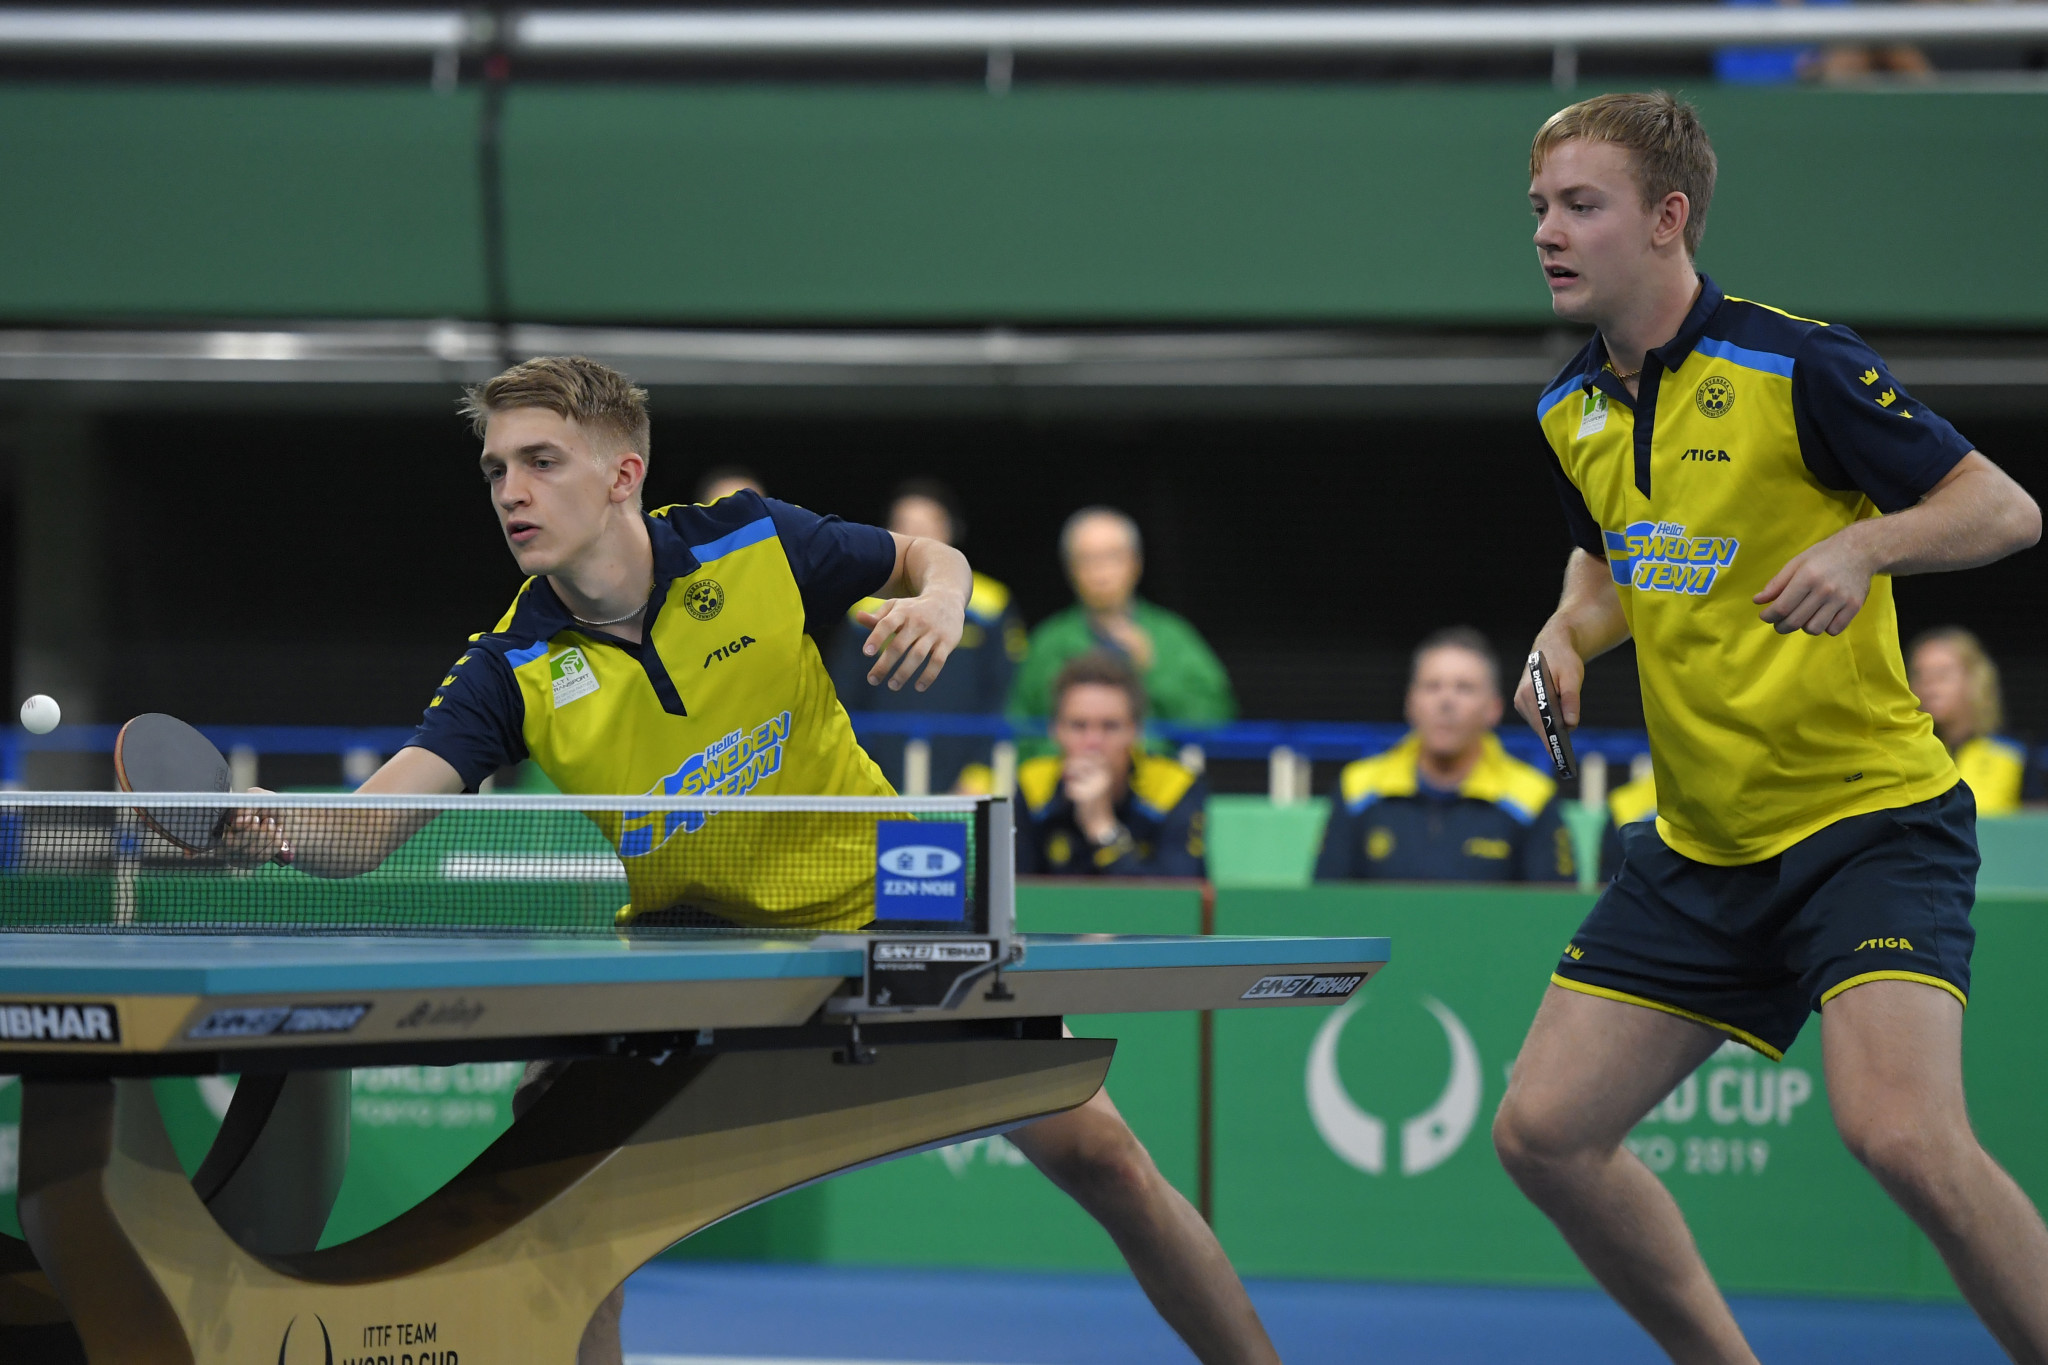 ITTF cancels Swedish International Open due to COVID-19 restrictions